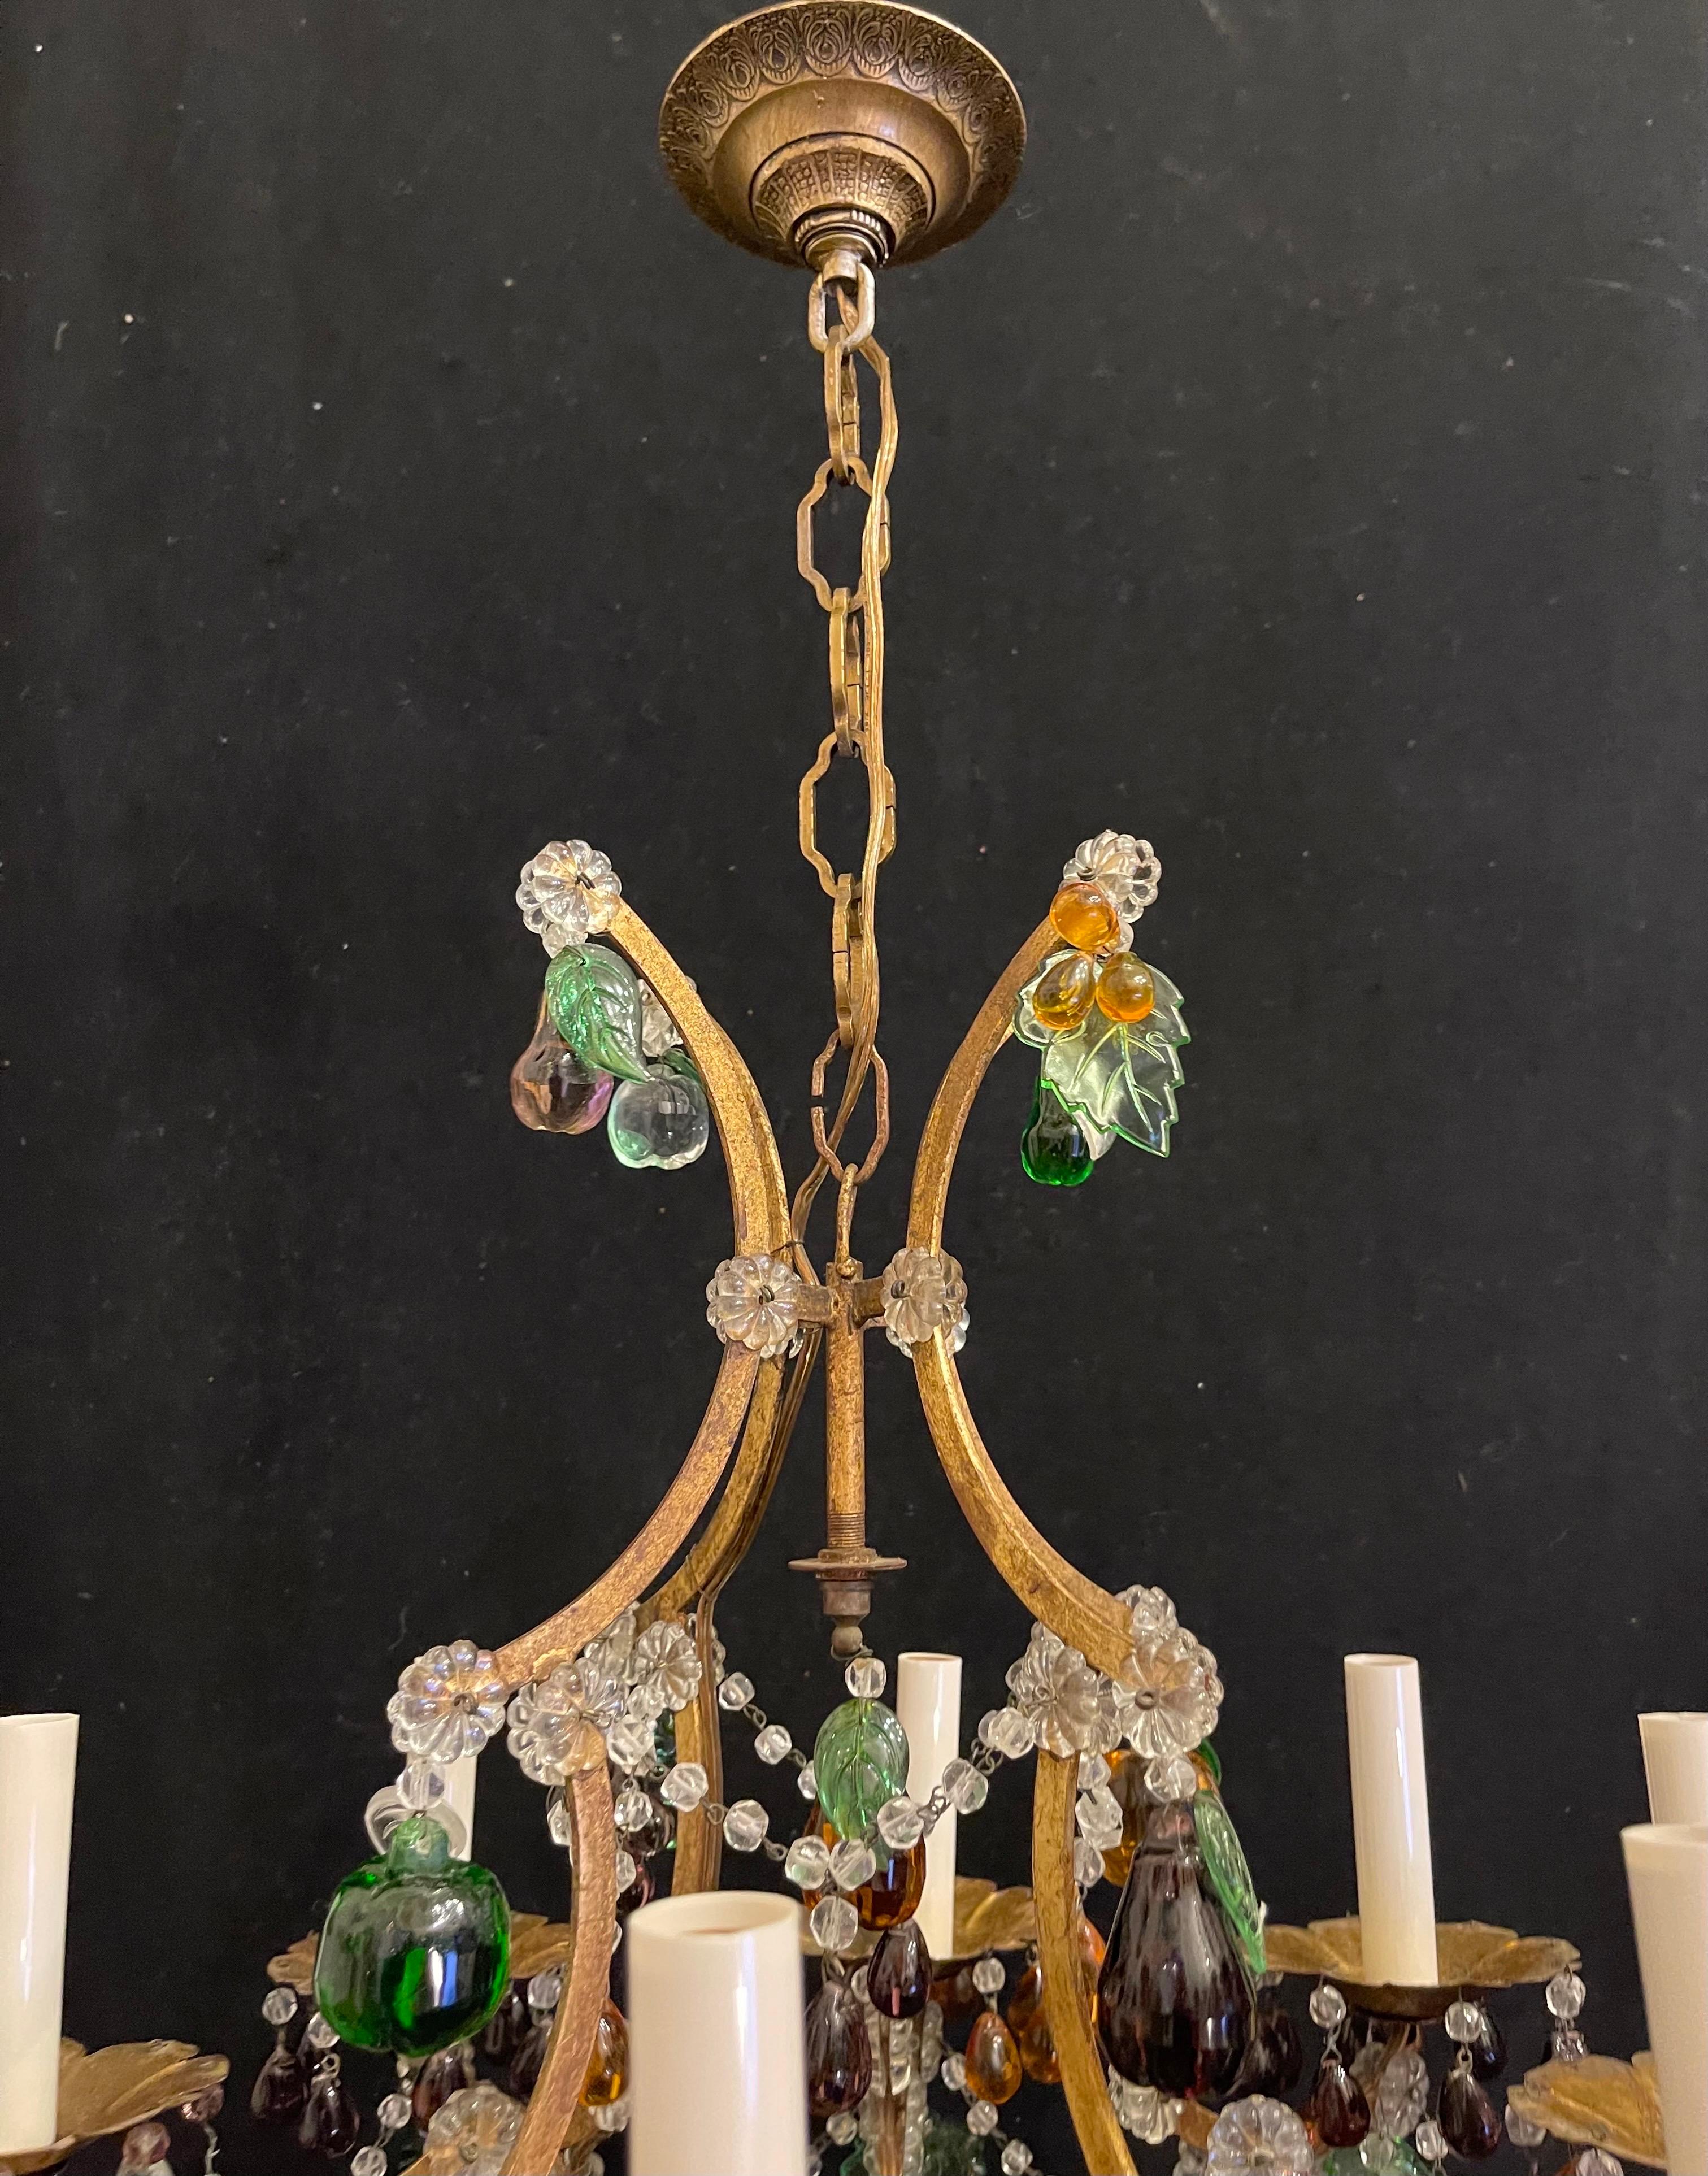 A wonderful Italian 1950's gold gilt iron and crystal art glass fruit Murano  decorated 8 candelabra light chandelier.
This beautiful chandelier consists of a gracefully scrolled gilt-iron bird cage frame with an assortment of colored glass fruits